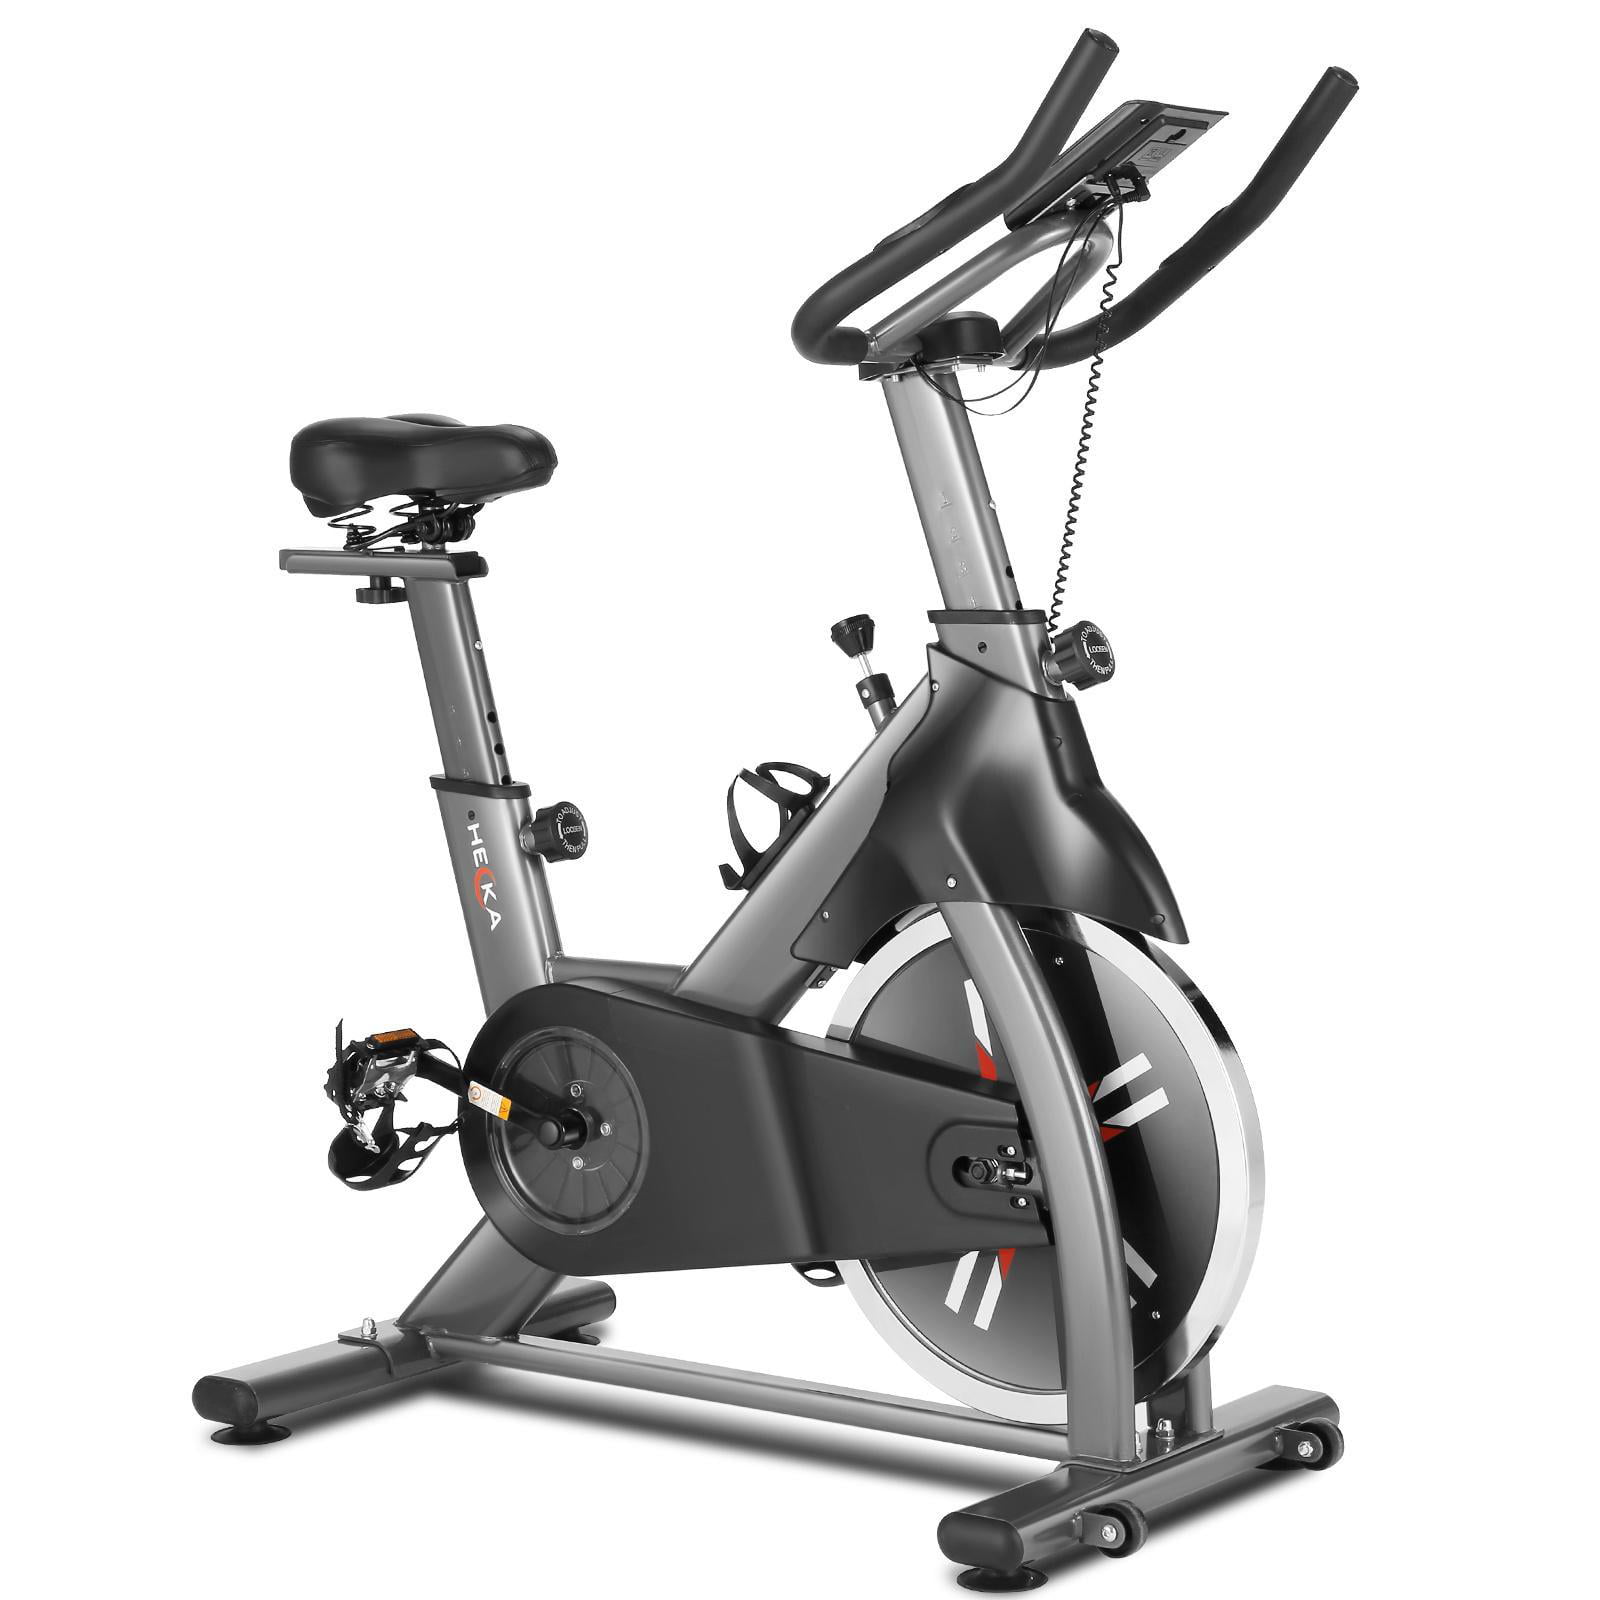 Details about   Exercise Bicycle Cycling Fitness Stationary Bike Cardio Home Indoor Home/Office! 